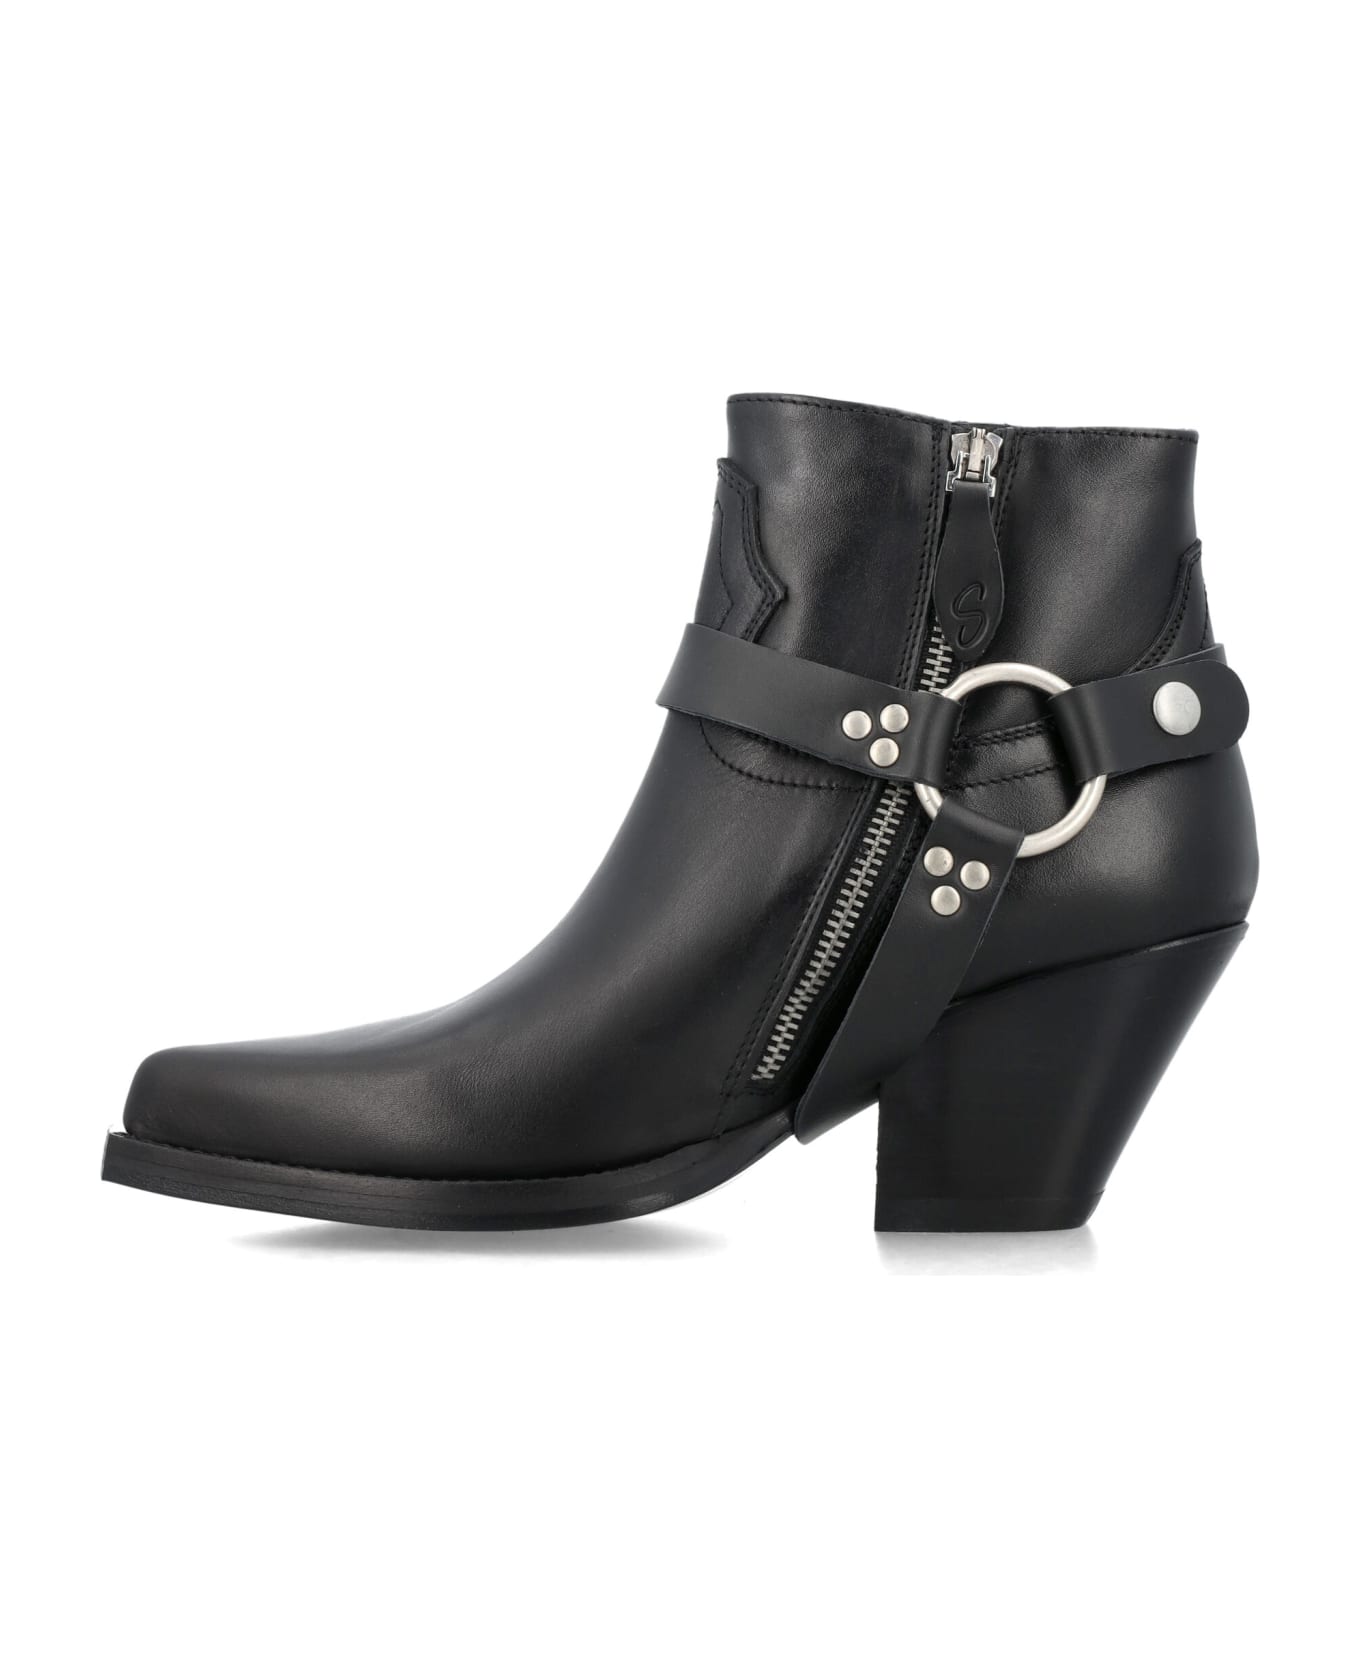 Sonora Jalapeno Belt Ankle Boots - BLACK ブーツ